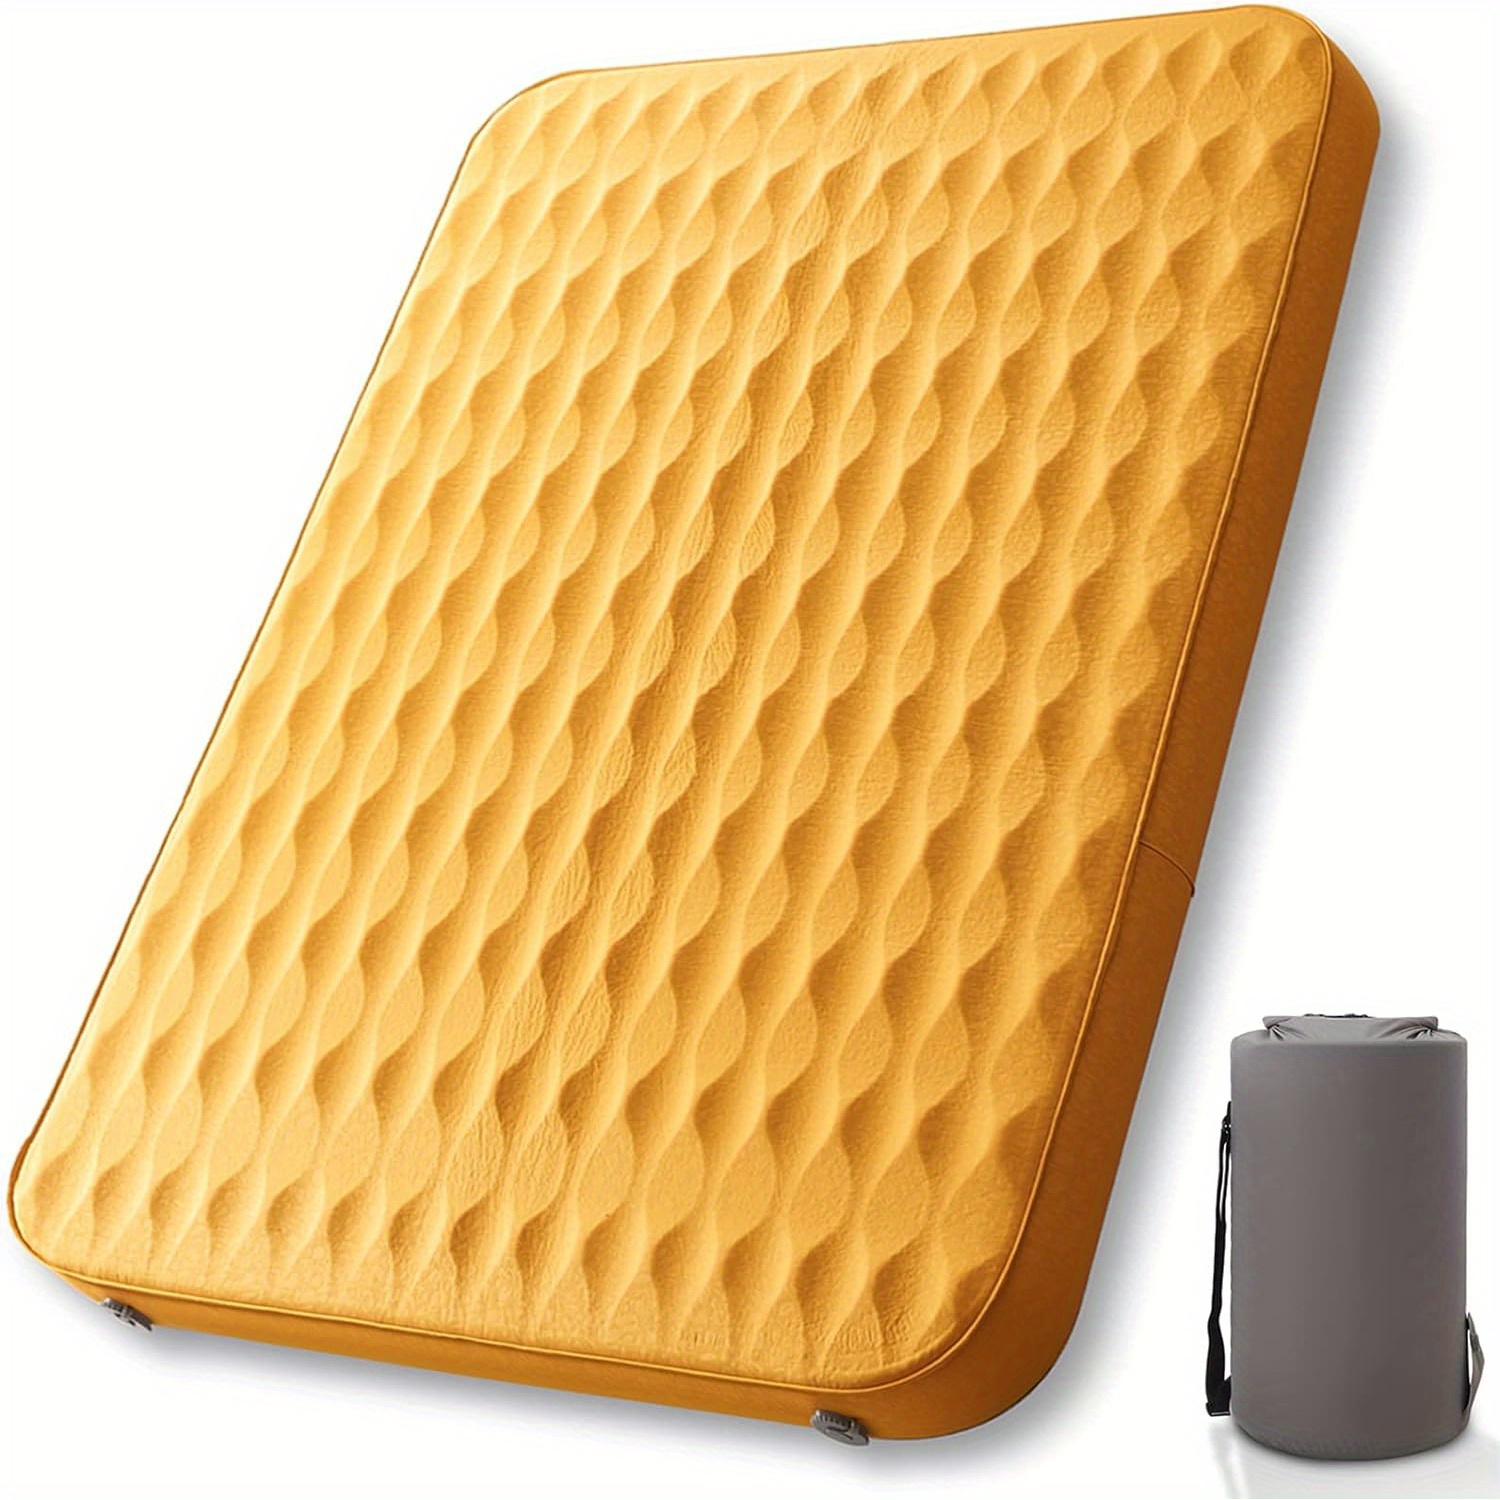 

Since Inflatable Mattress Easy To Fill The Required Firmness, Large Camping Mattress, Solid Foam And Soft Touch, Heat Insulation Double Layer Camping Mat